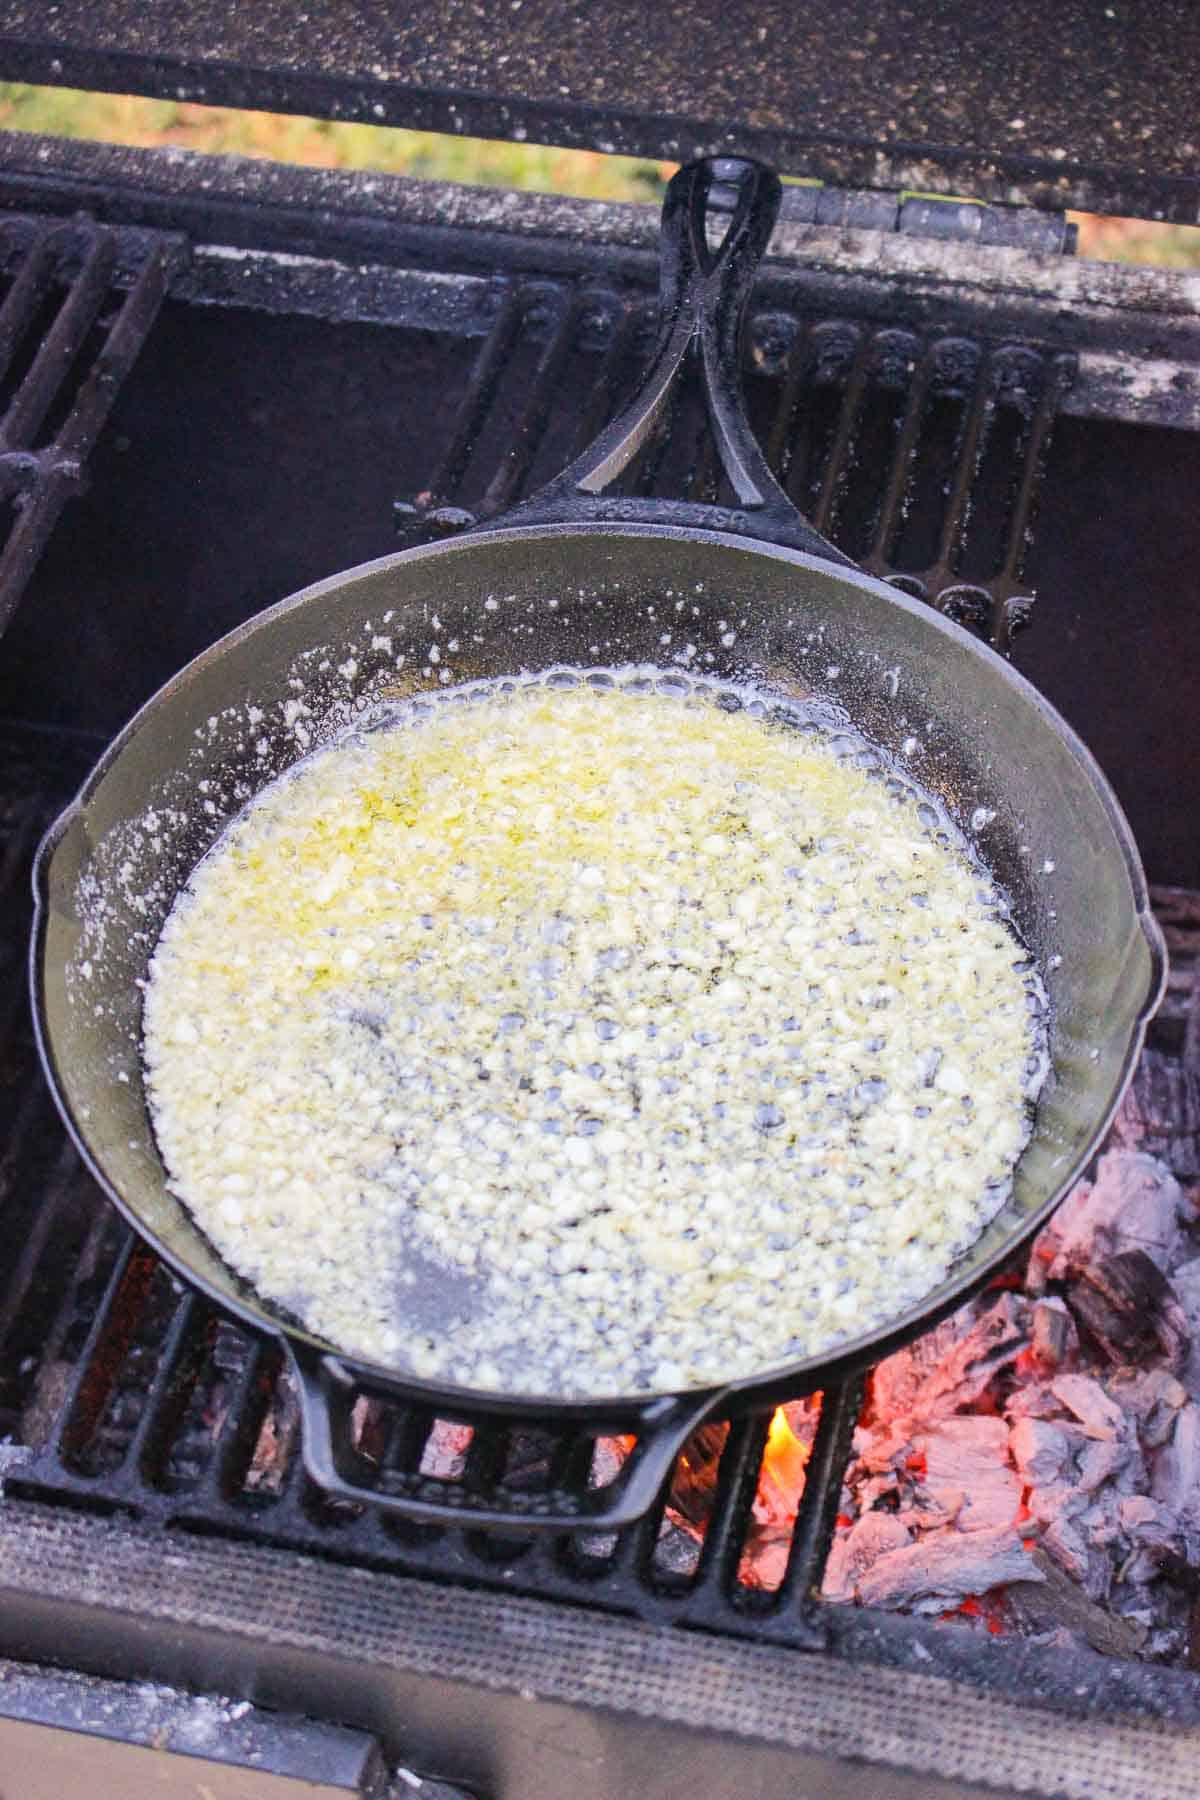 The butter and garlic simmering over the fire.